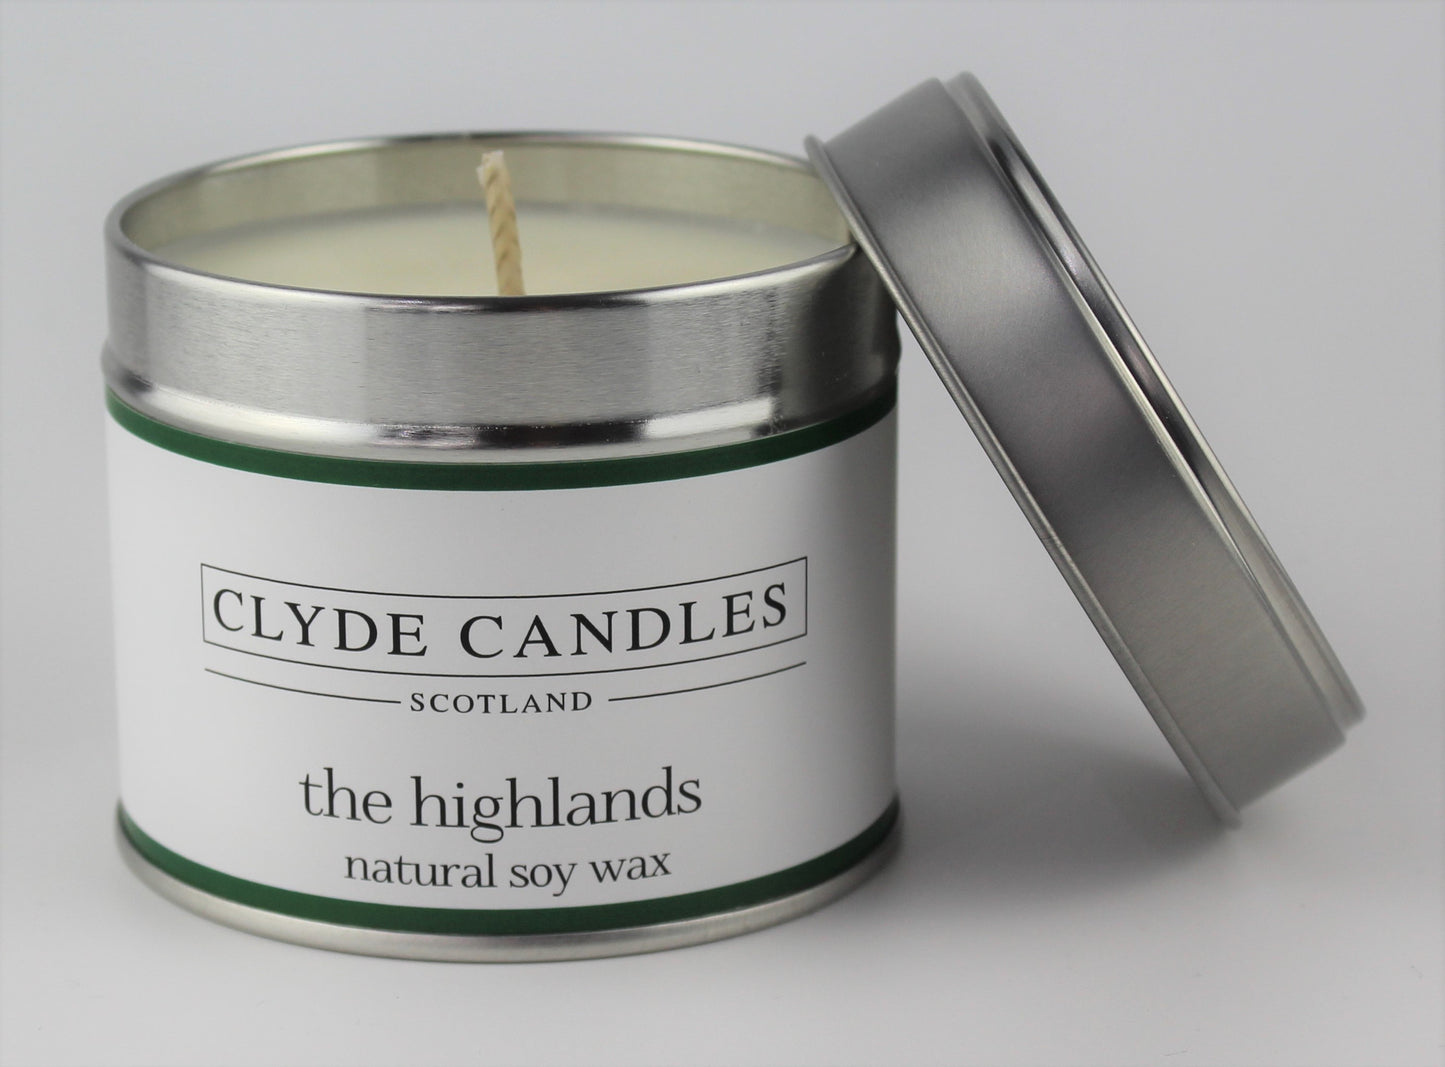 The Highlands Scented Candle Tin, Natural Soy Wax, Scottish Candles, Clyde Candles